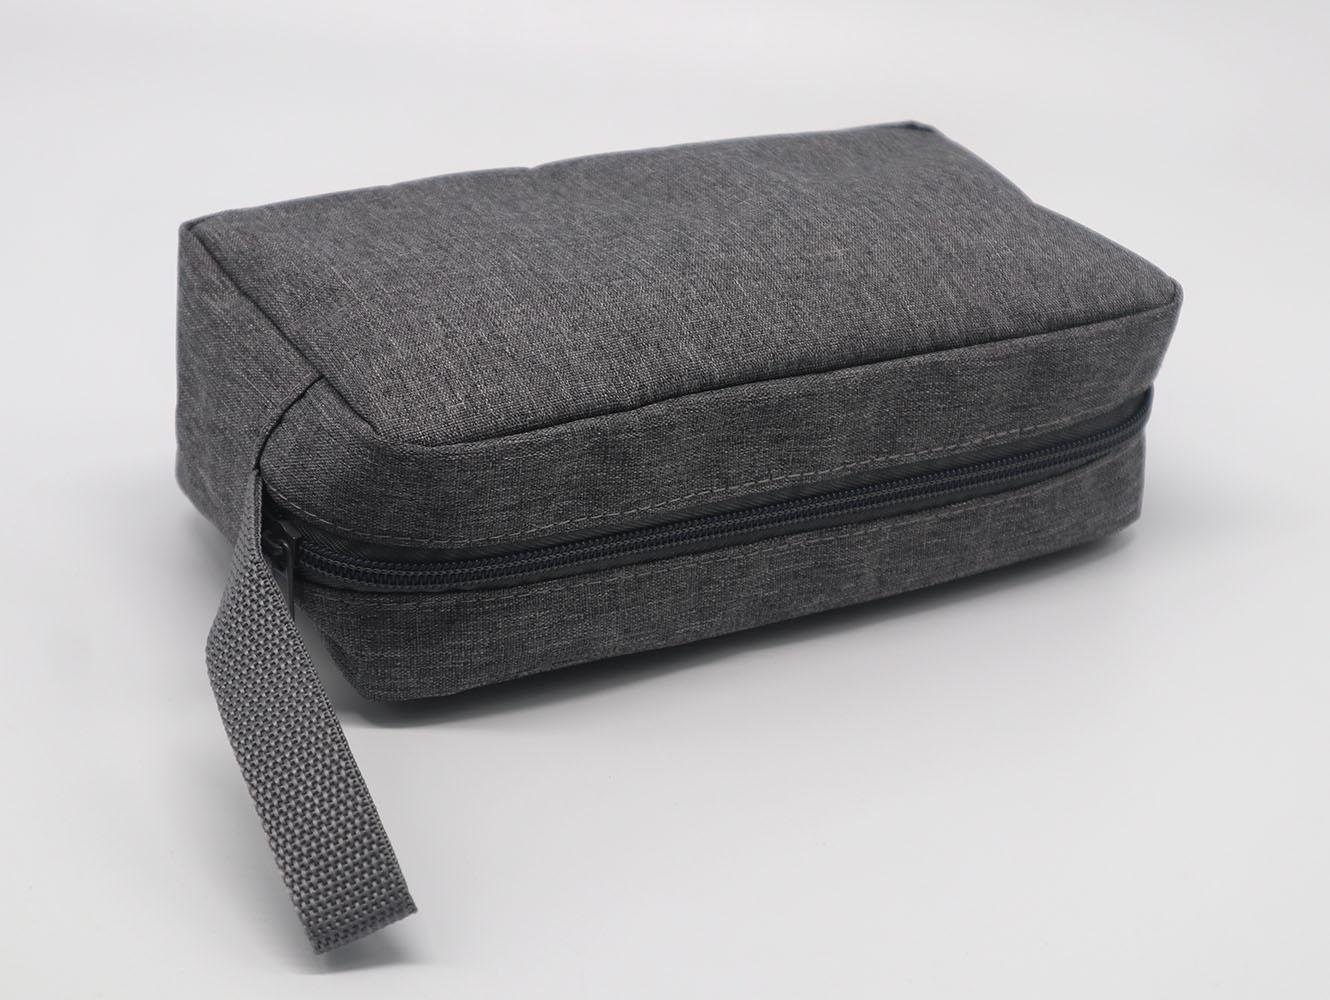 Promotion gift cheap men toiletry bag grey colour polyester made 4